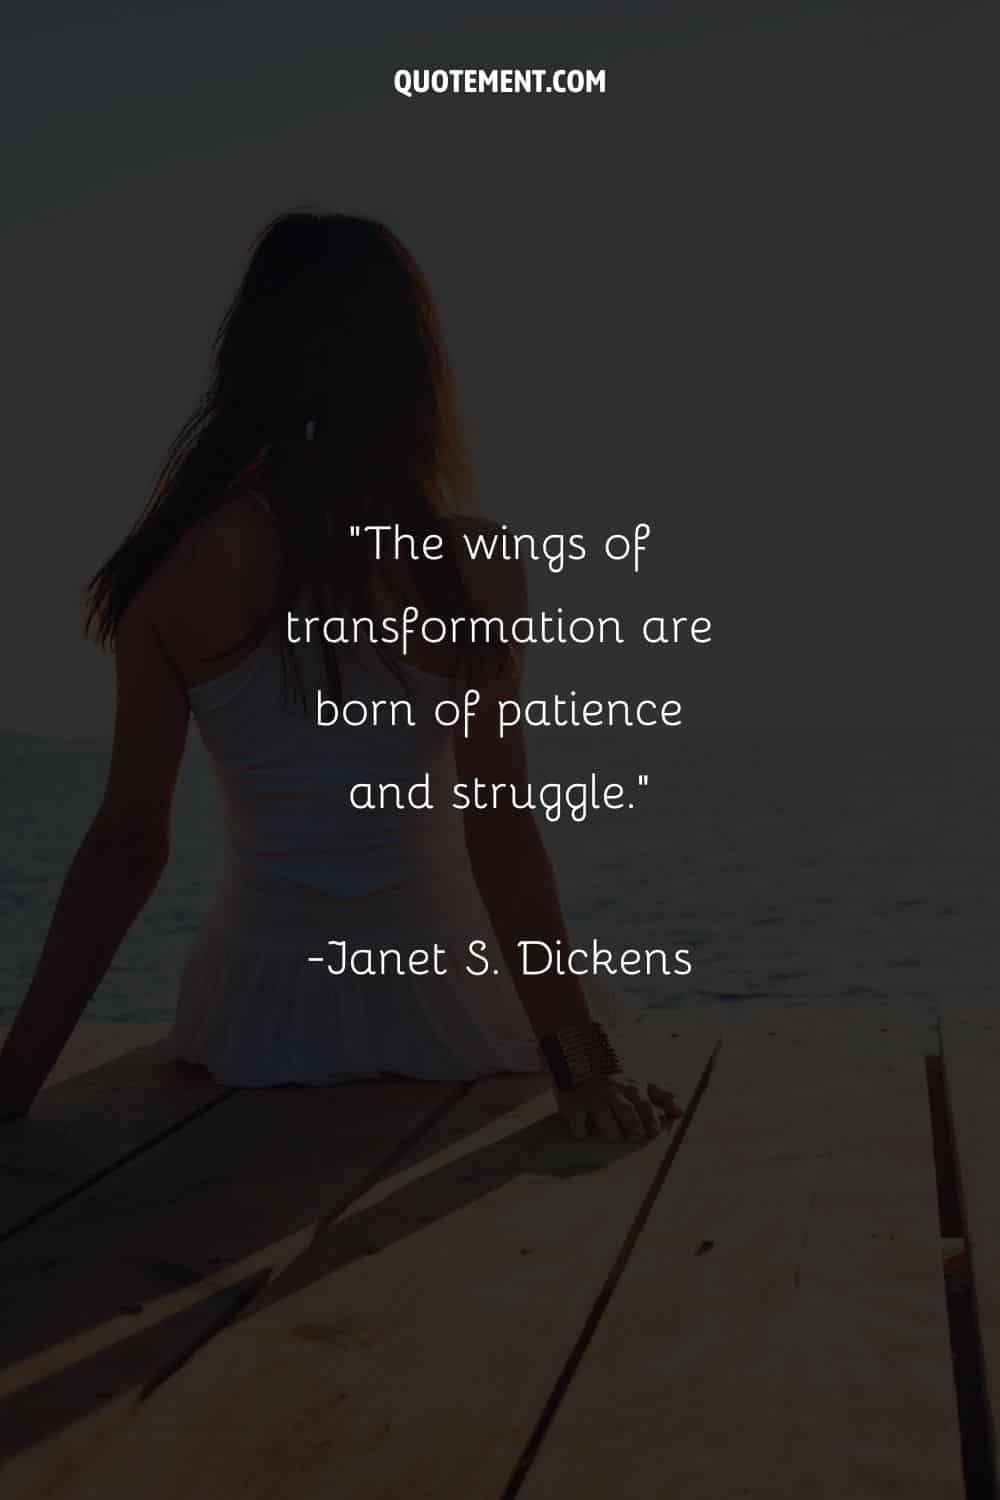 Image of a woman relaxing by serene waters representing a quote about transformation